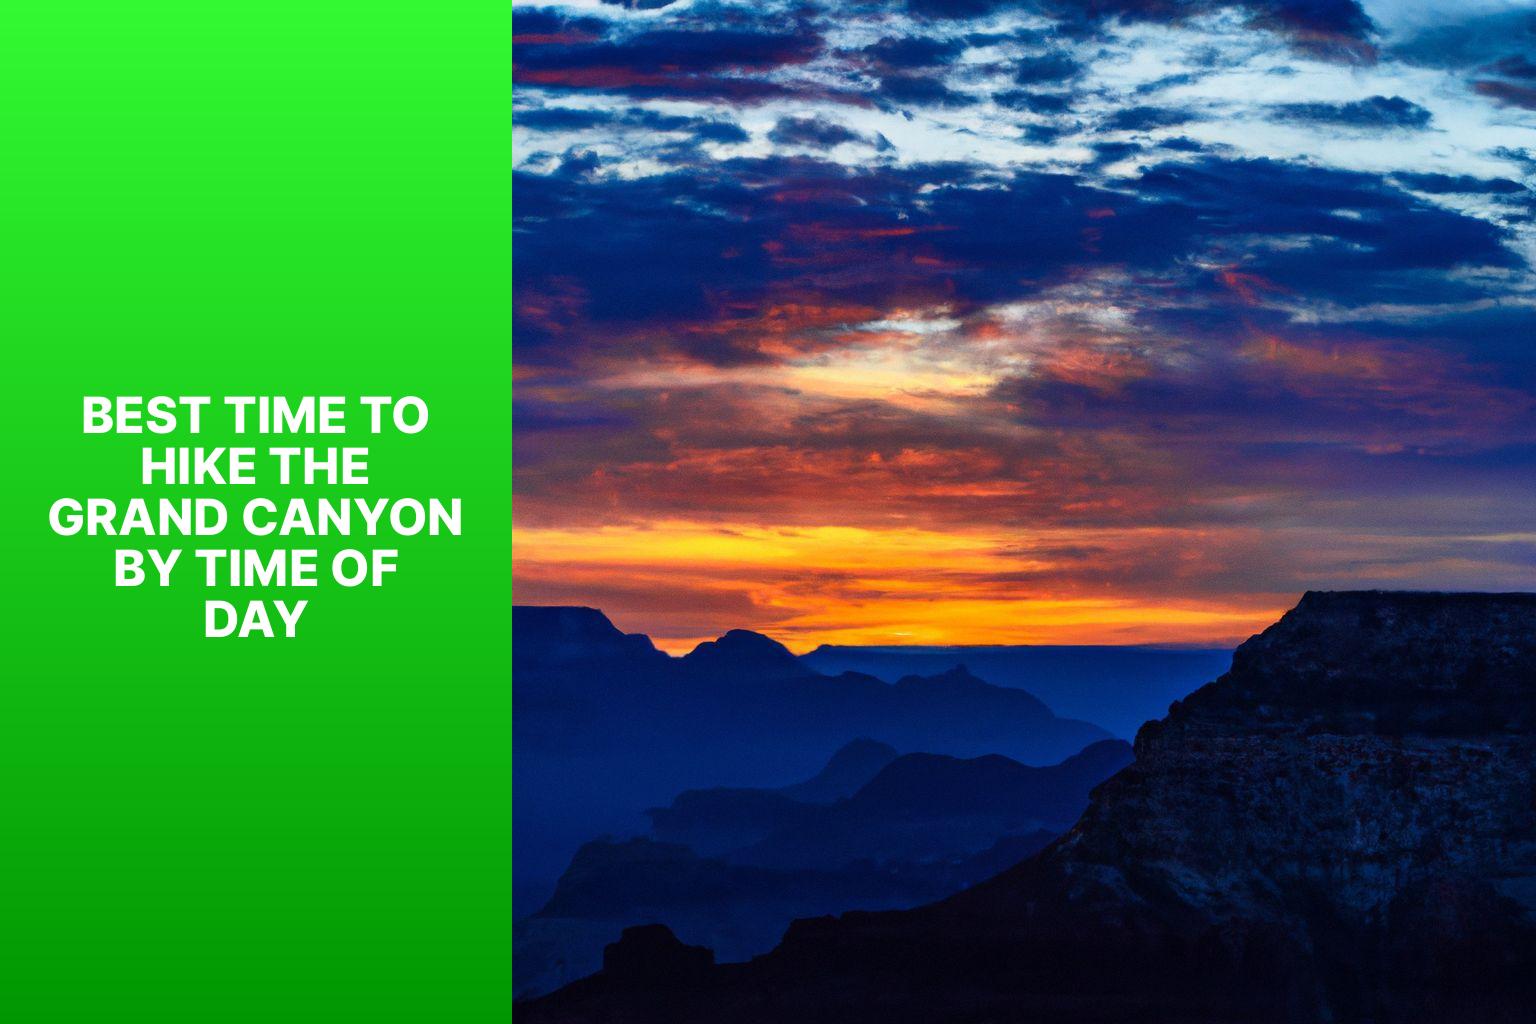 Best Time to Hike the Grand Canyon by Time of Day - When is the Best Time to Hike the Grand Canyon 